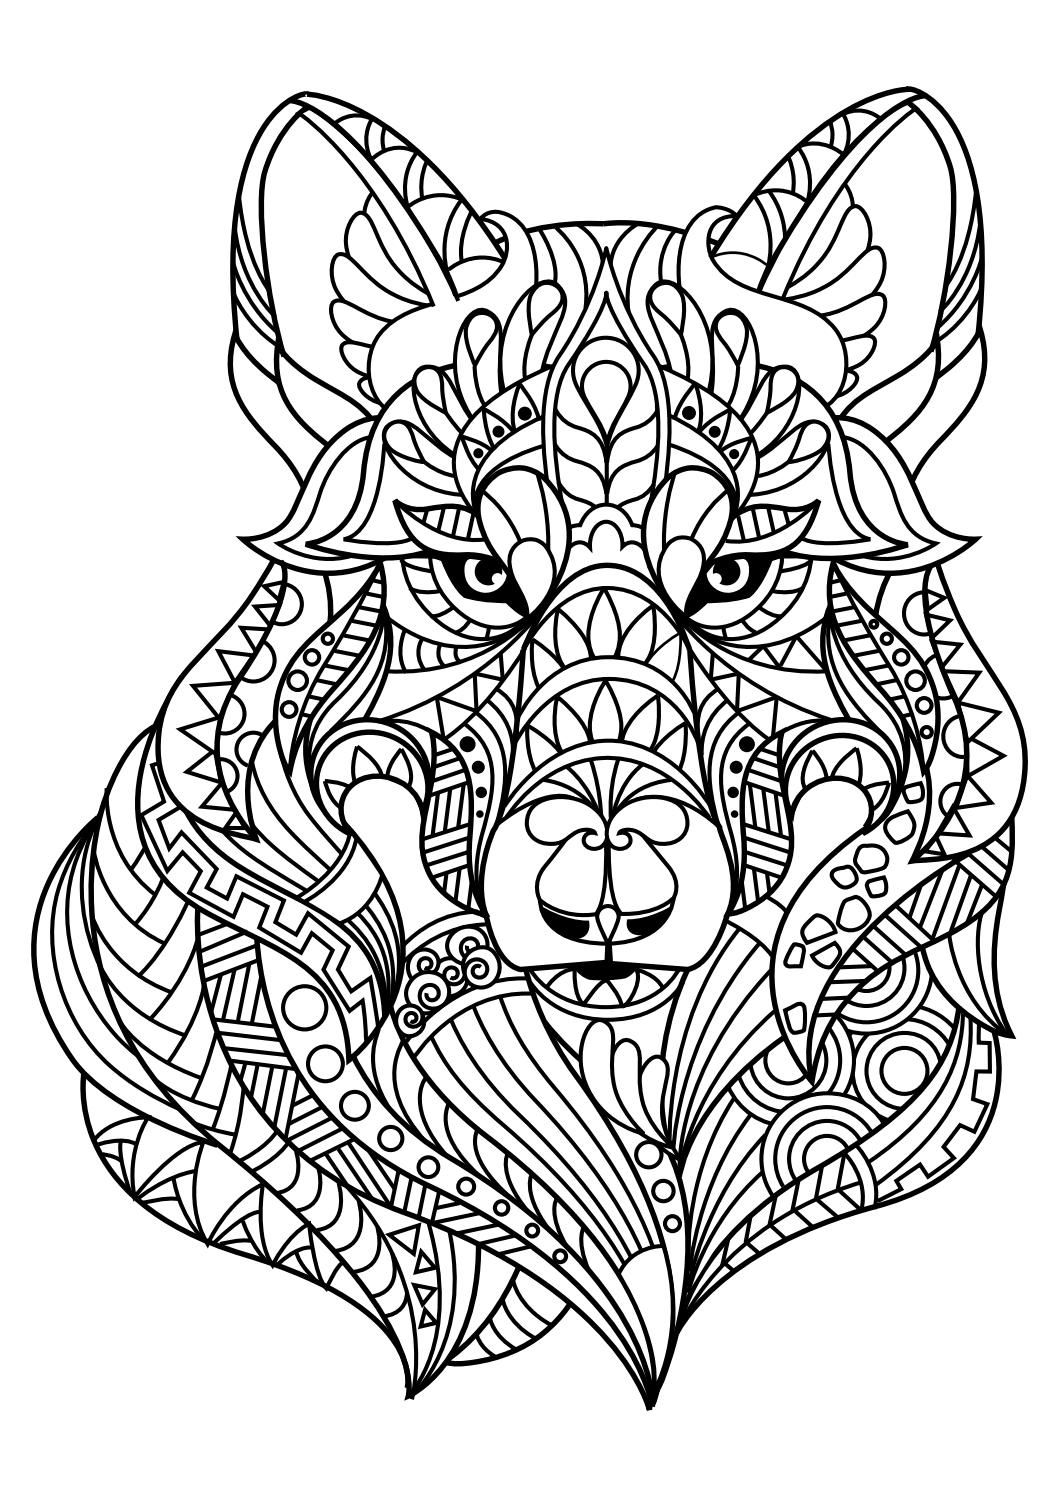 mindfulness-coloring-pages-at-getdrawings-free-download